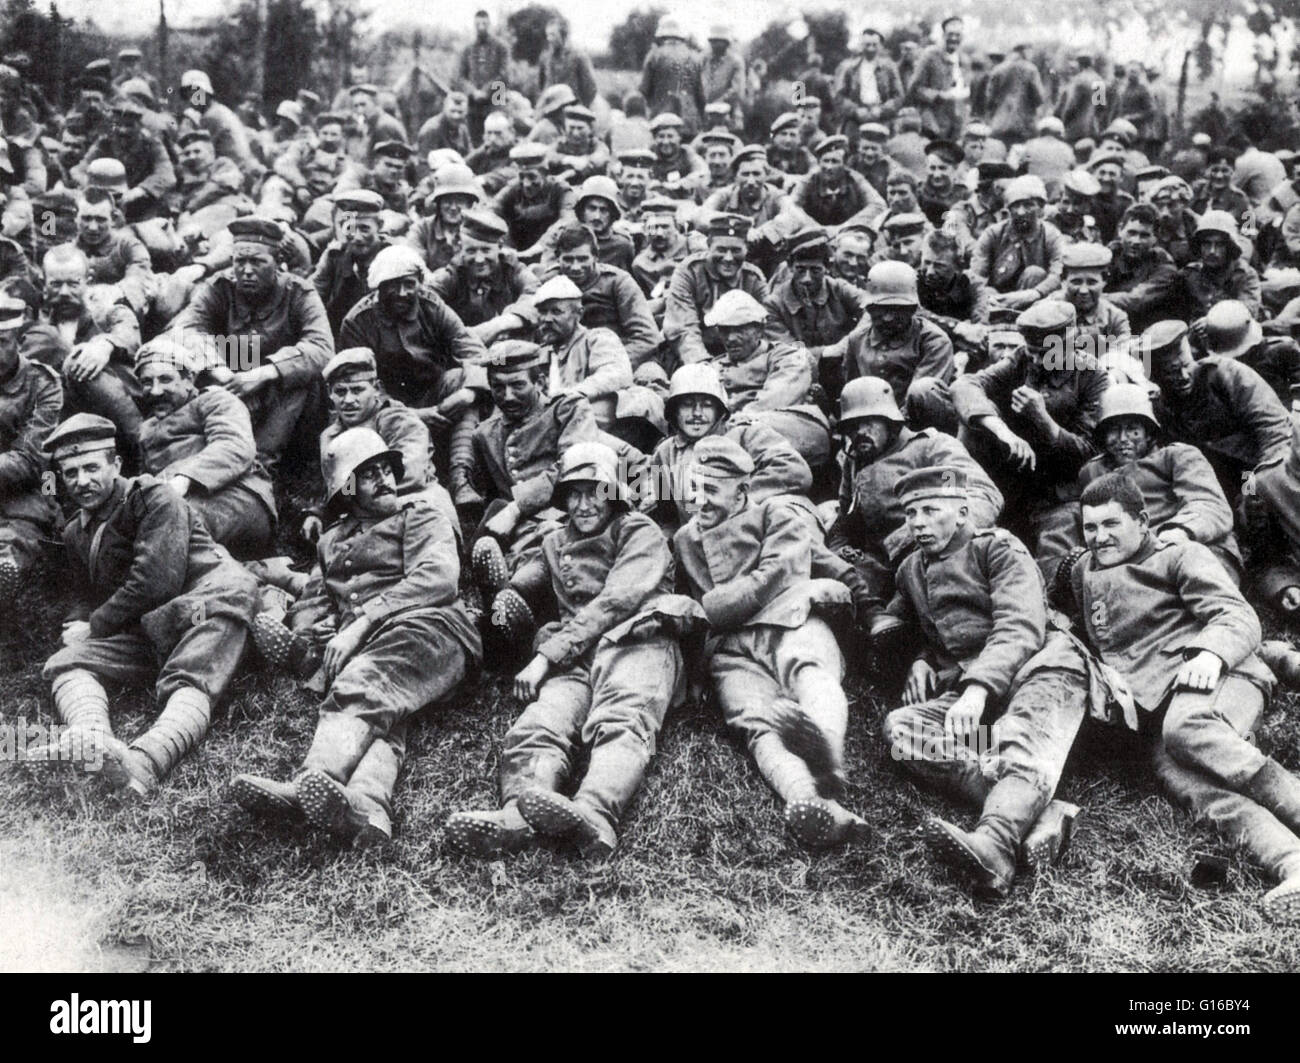 German prisoners taken during the battle. The Battle of Messines (June 7-14, 1917) was an offensive conducted by the British Second Army on the Western Front near the village of Messines in Belgian West Flanders during WWI. The offensive forced the German Stock Photo